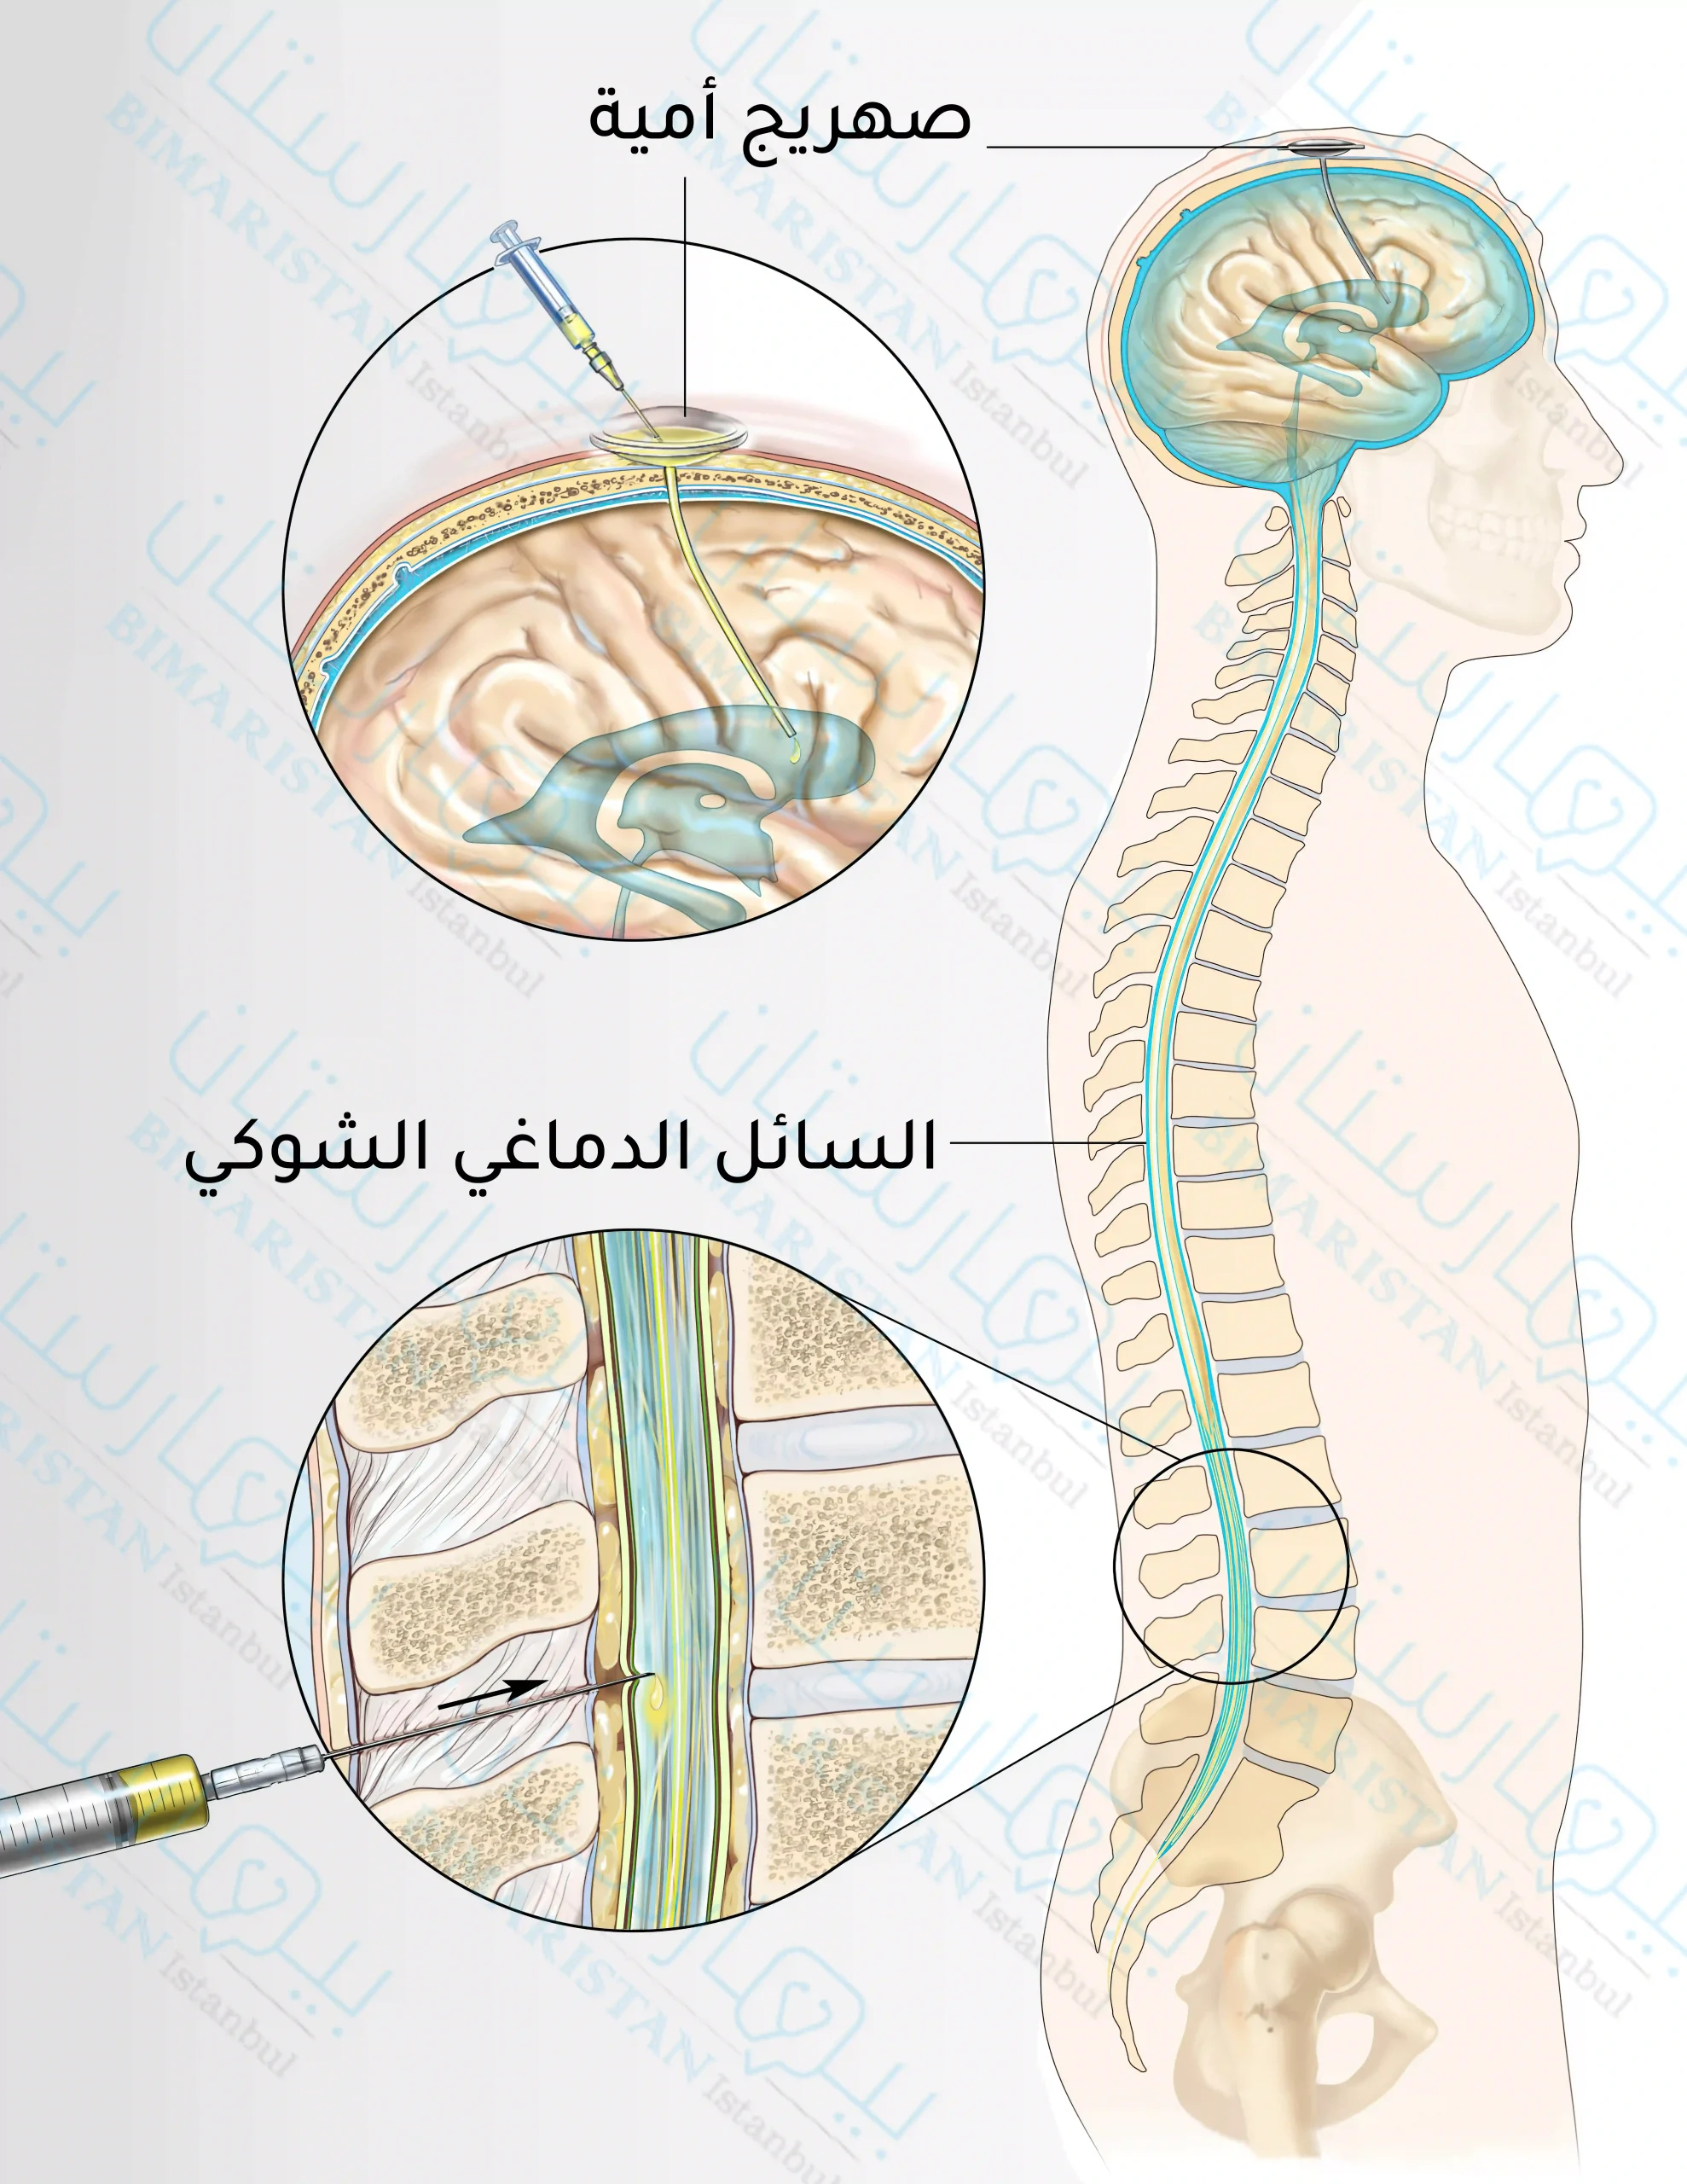 Intrathecal injection of chemotherapy drugs into the spinal canal or subarachnoid space (the Ommaya Reservoir is the area where the cerebrospinal fluid drains).